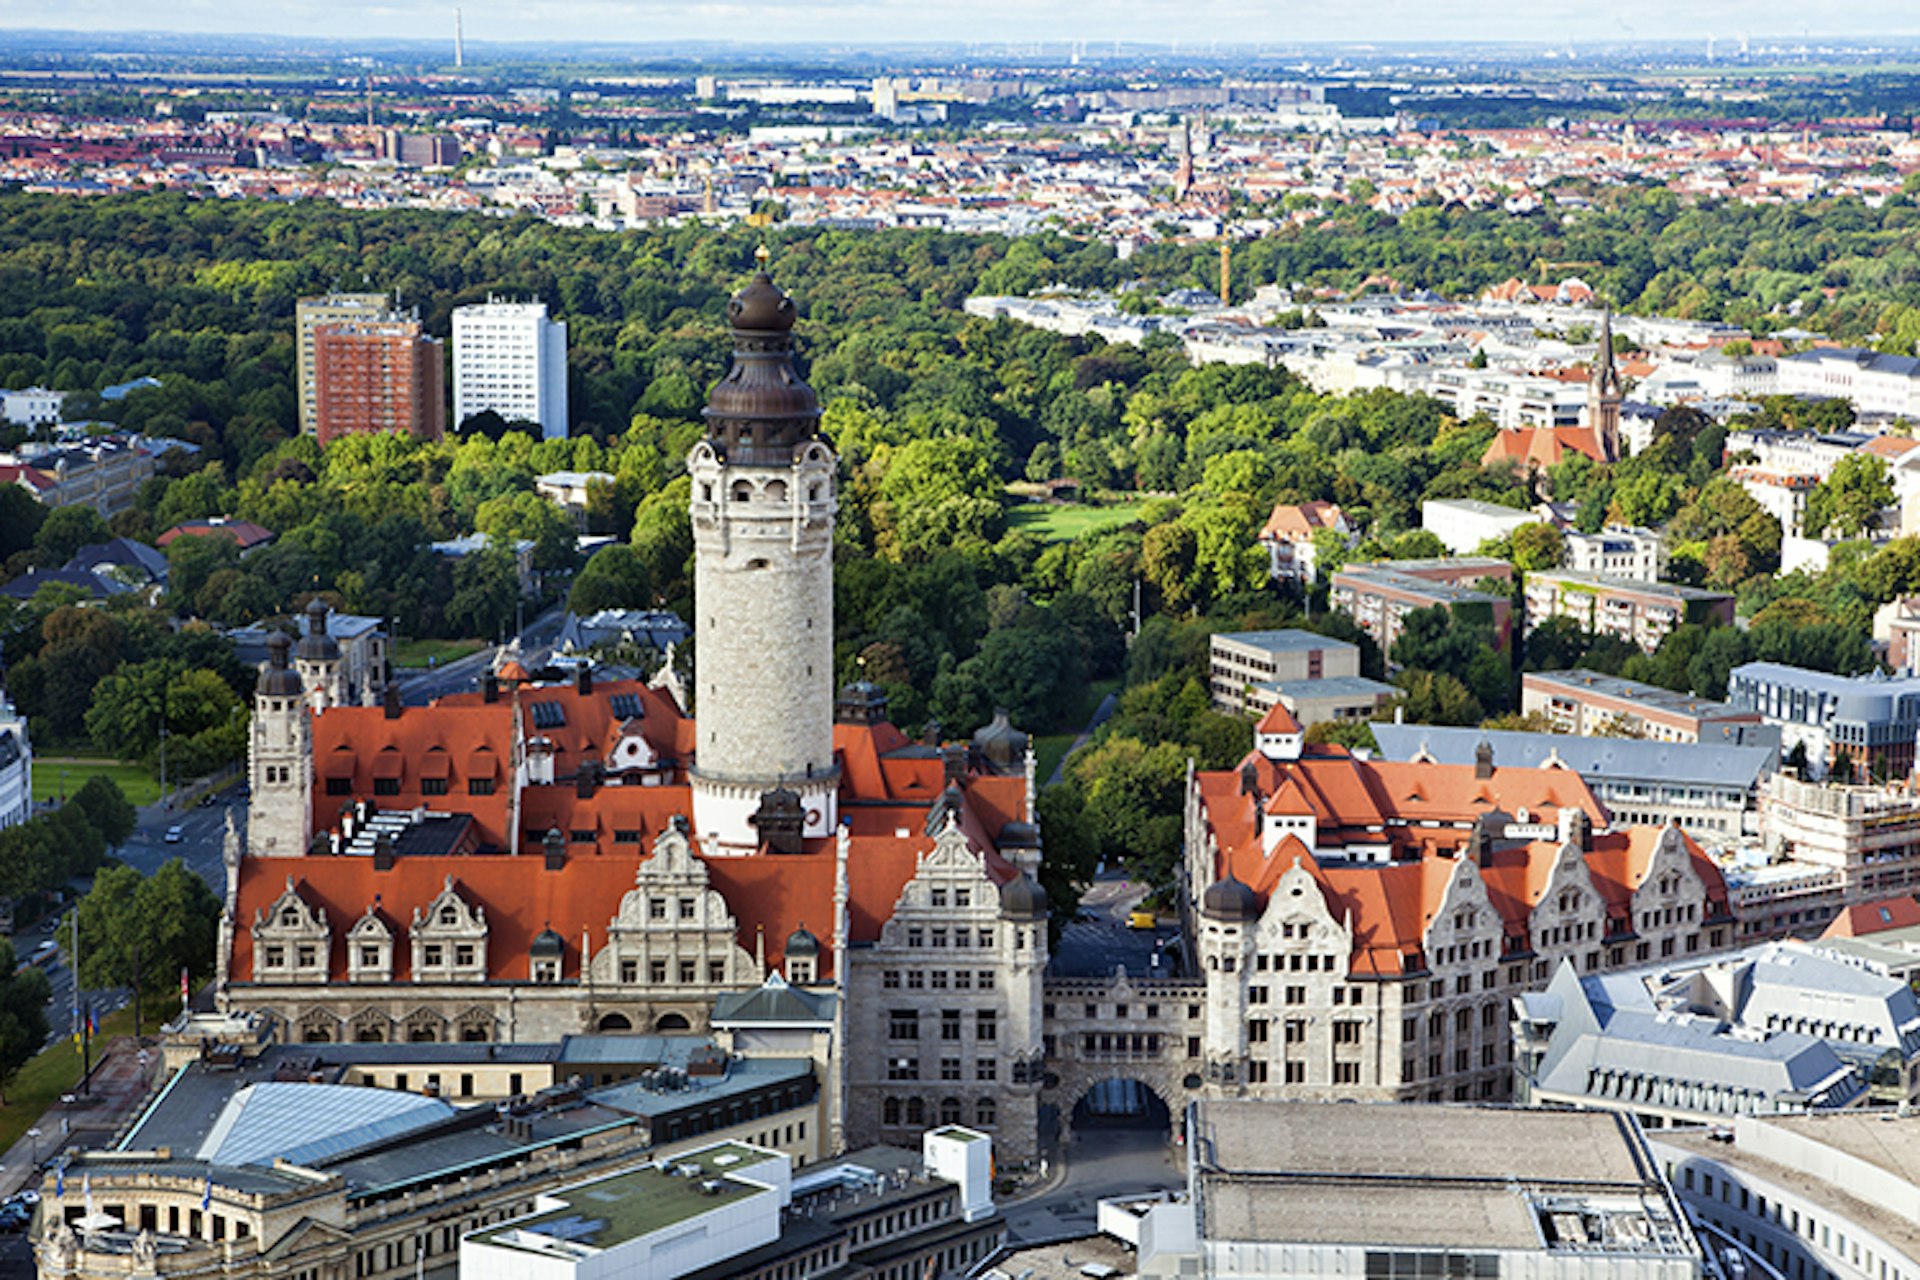 Leipzig is gearing up for a year of festivities. Image by Oliver Hoffmann / iStock / Getty Images